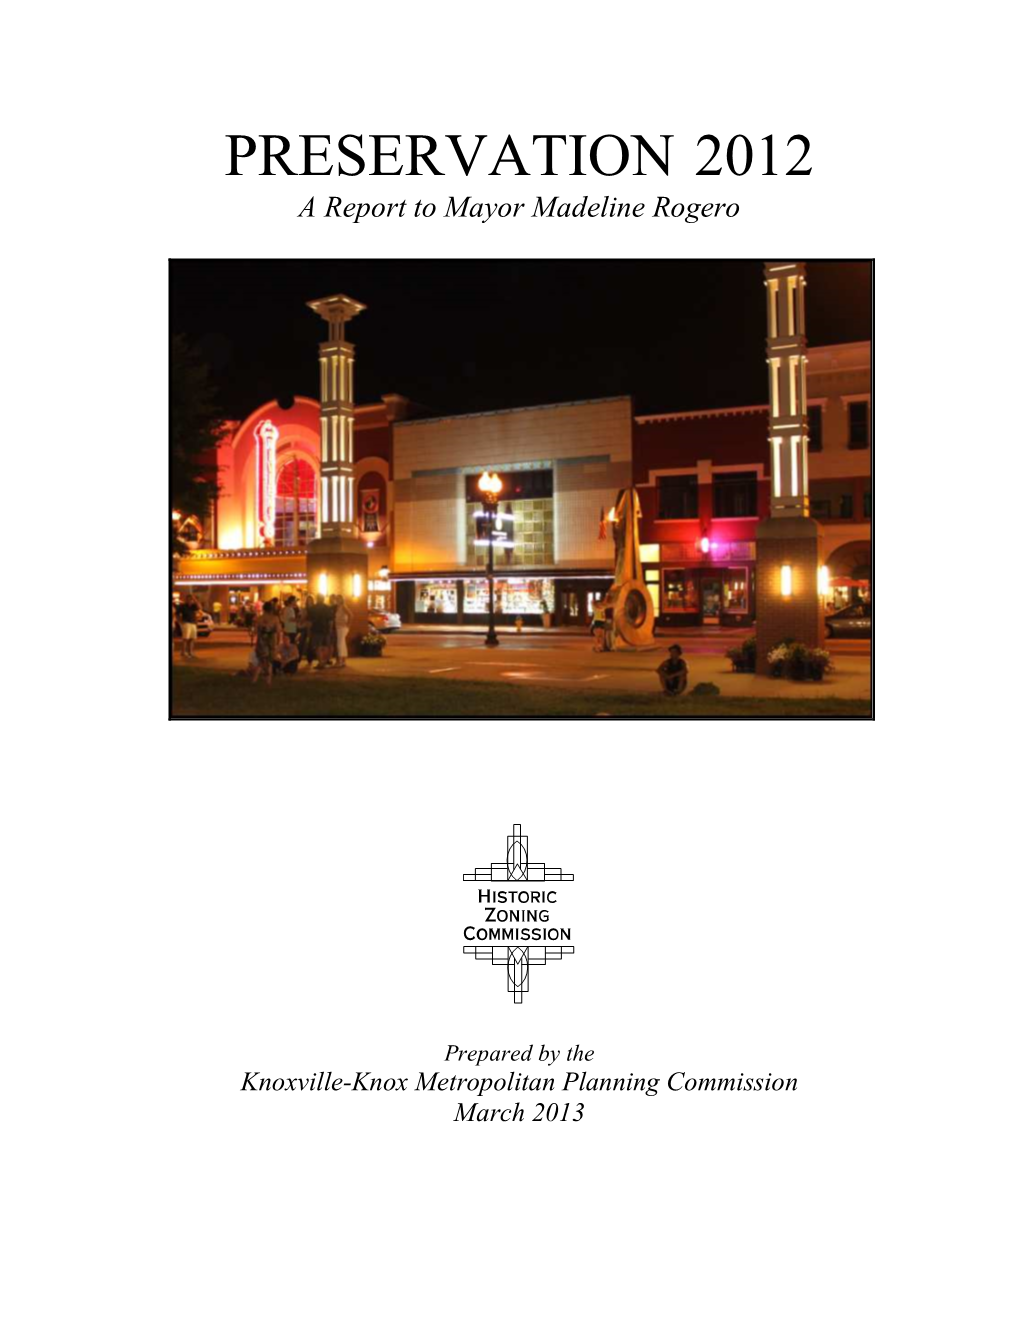 PRESERVATION 2012 a Report to Mayor Madeline Rogero